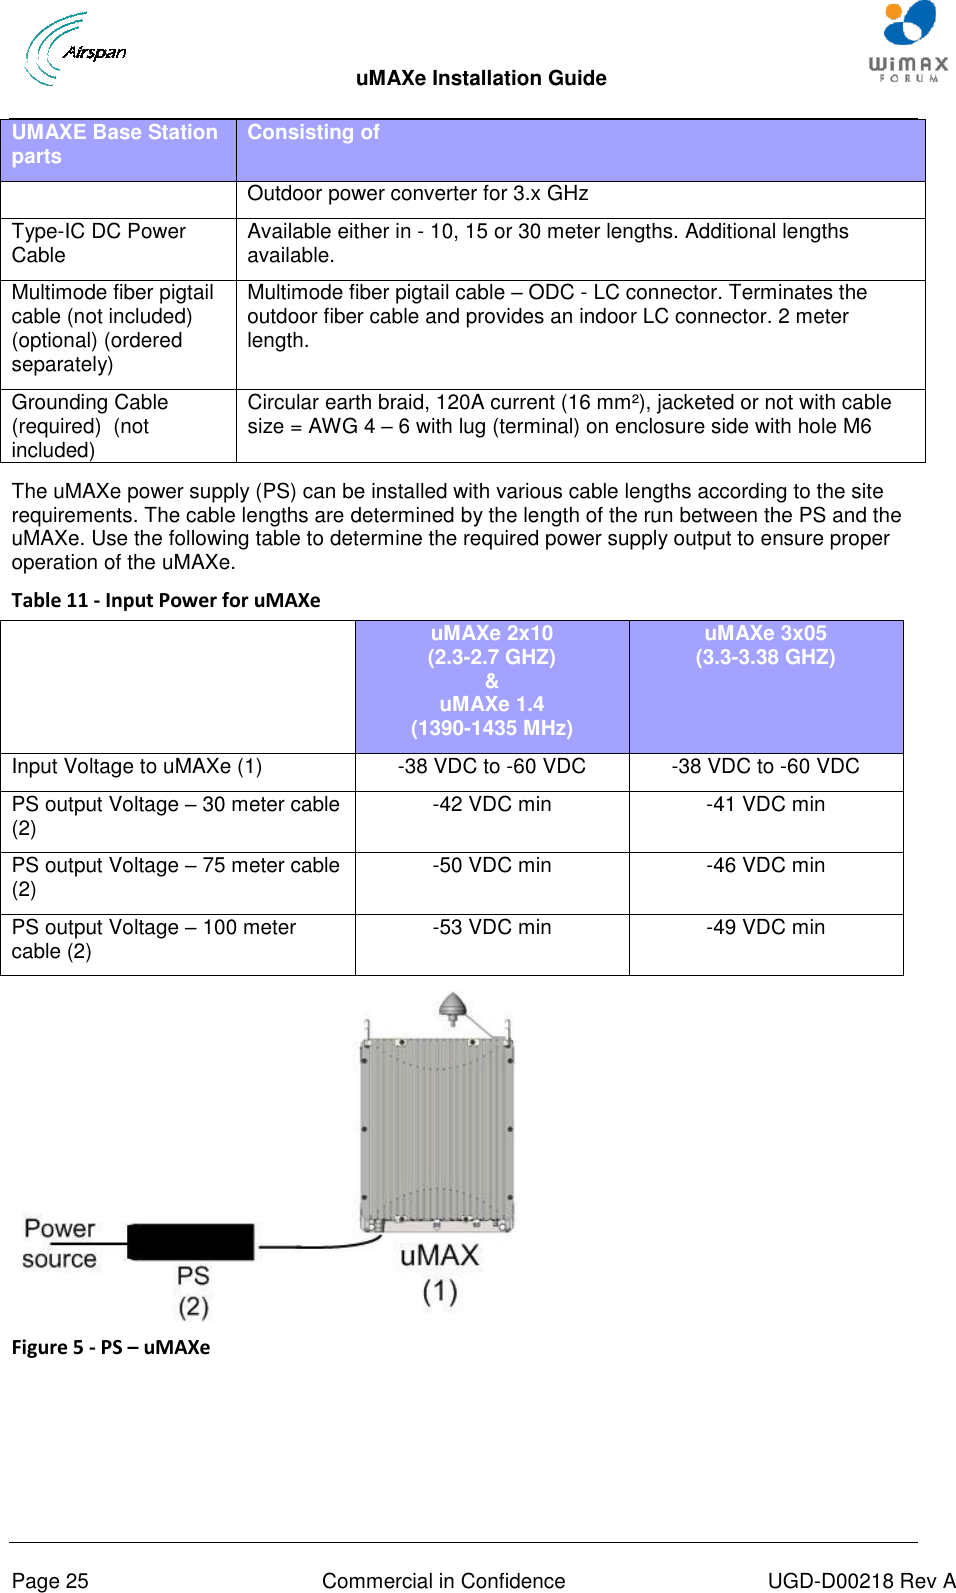  uMAXe Installation Guide       Page 25  Commercial in Confidence  UGD-D00218 Rev A UMAXE Base Station parts Consisting of Outdoor power converter for 3.x GHz Type-IC DC Power Cable Available either in - 10, 15 or 30 meter lengths. Additional lengths available. Multimode fiber pigtail cable (not included) (optional) (ordered separately) Multimode fiber pigtail cable – ODC - LC connector. Terminates the outdoor fiber cable and provides an indoor LC connector. 2 meter length.  Grounding Cable (required)  (not included)  Circular earth braid, 120A current (16 mm²), jacketed or not with cable size = AWG 4 – 6 with lug (terminal) on enclosure side with hole M6  The uMAXe power supply (PS) can be installed with various cable lengths according to the site requirements. The cable lengths are determined by the length of the run between the PS and the uMAXe. Use the following table to determine the required power supply output to ensure proper operation of the uMAXe. Table 11 - Input Power for uMAXe  uMAXe 2x10 (2.3-2.7 GHZ) &amp; uMAXe 1.4 (1390-1435 MHz) uMAXe 3x05 (3.3-3.38 GHZ) Input Voltage to uMAXe (1) -38 VDC to -60 VDC -38 VDC to -60 VDC PS output Voltage – 30 meter cable (2) -42 VDC min -41 VDC min PS output Voltage – 75 meter cable (2) -50 VDC min -46 VDC min PS output Voltage – 100 meter cable (2) -53 VDC min -49 VDC min      Figure 5 - PS – uMAXe